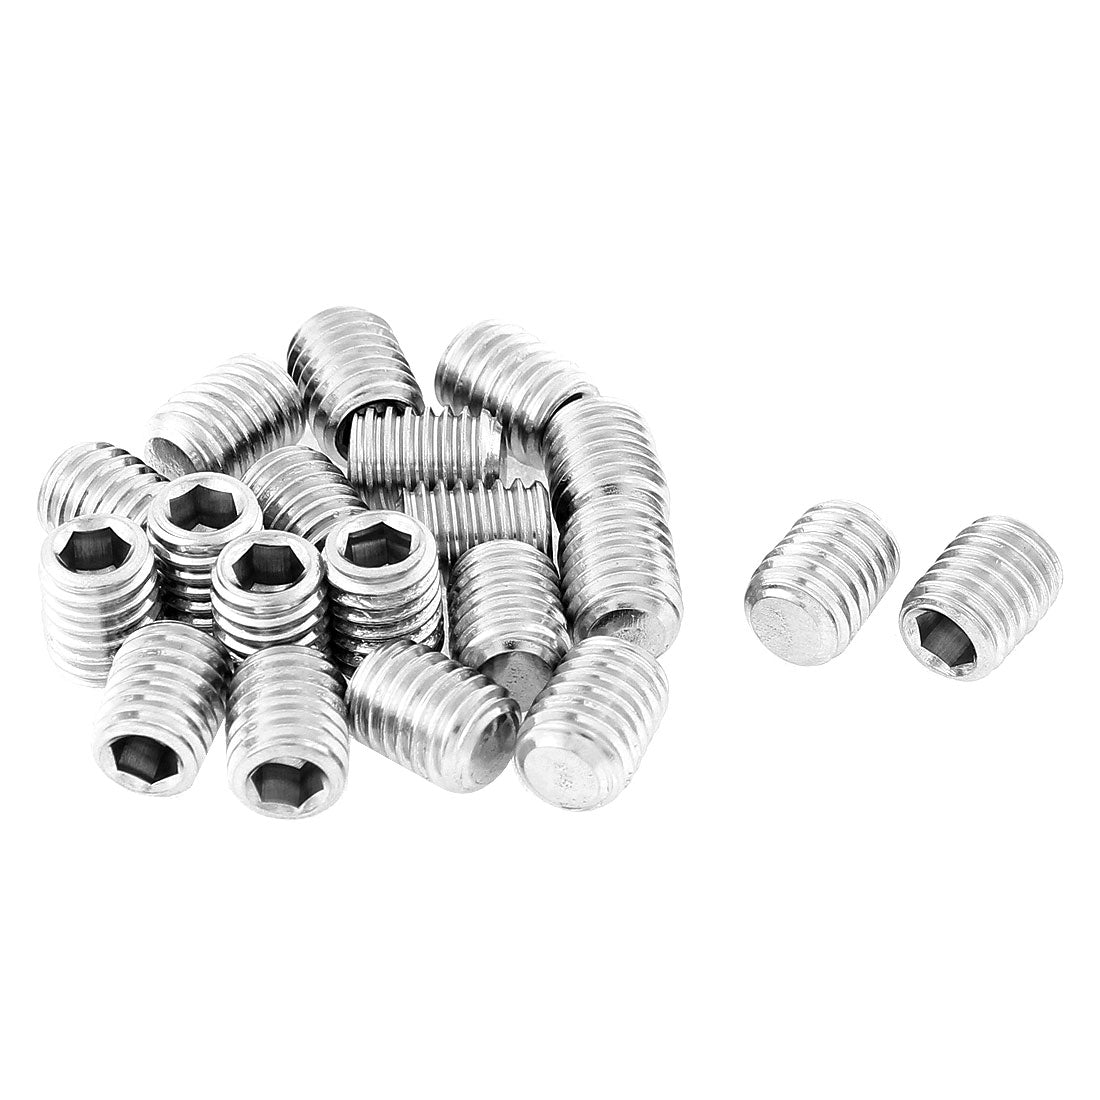 uxcell Uxcell M8x10mm 1.25mm Pitch Stainless Steel Hex Socket Set Flat Point Grub Screws 20pcs